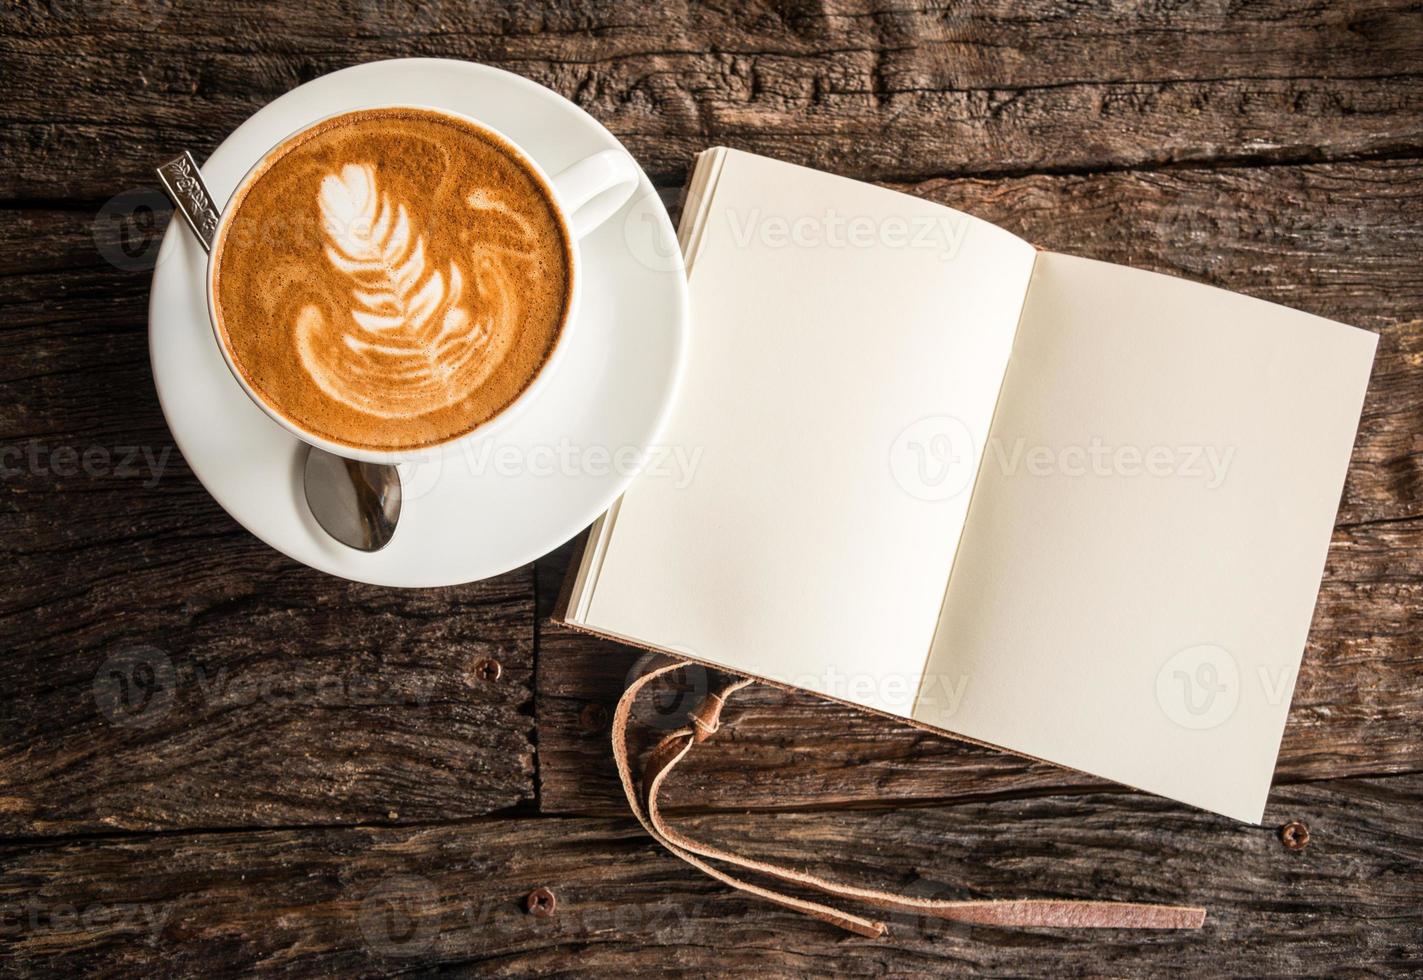 A cup of hot coffee with latte art on the surface with the leather book on the wooden table. photo